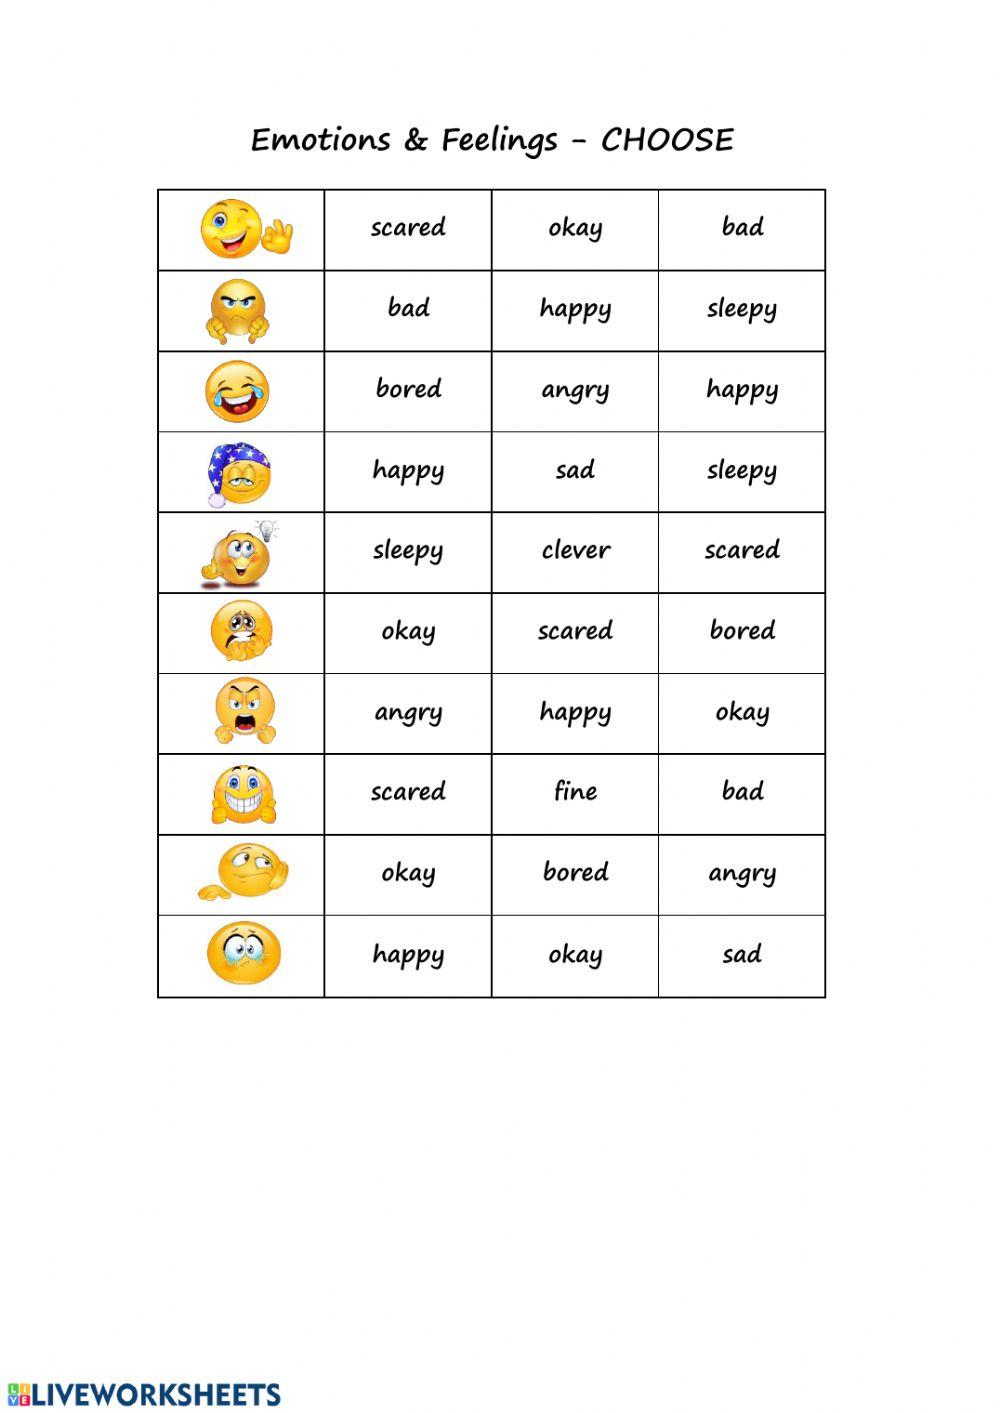 Emotions and feelings - CHOOSE THE RIGHT ANSWER